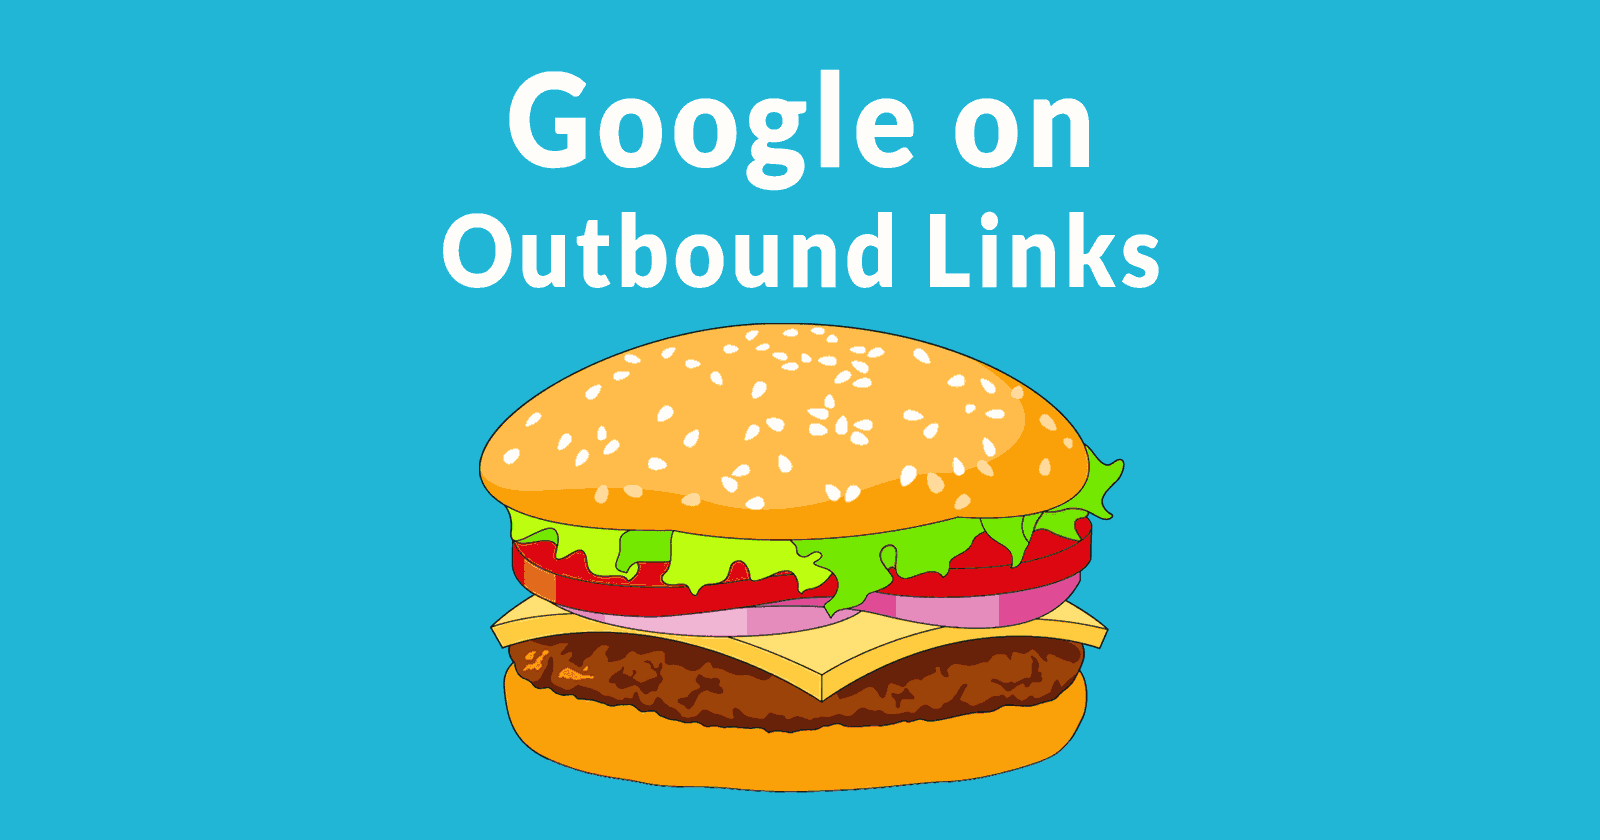 Image of a hamburger and the words, "Google on Outbound Links"